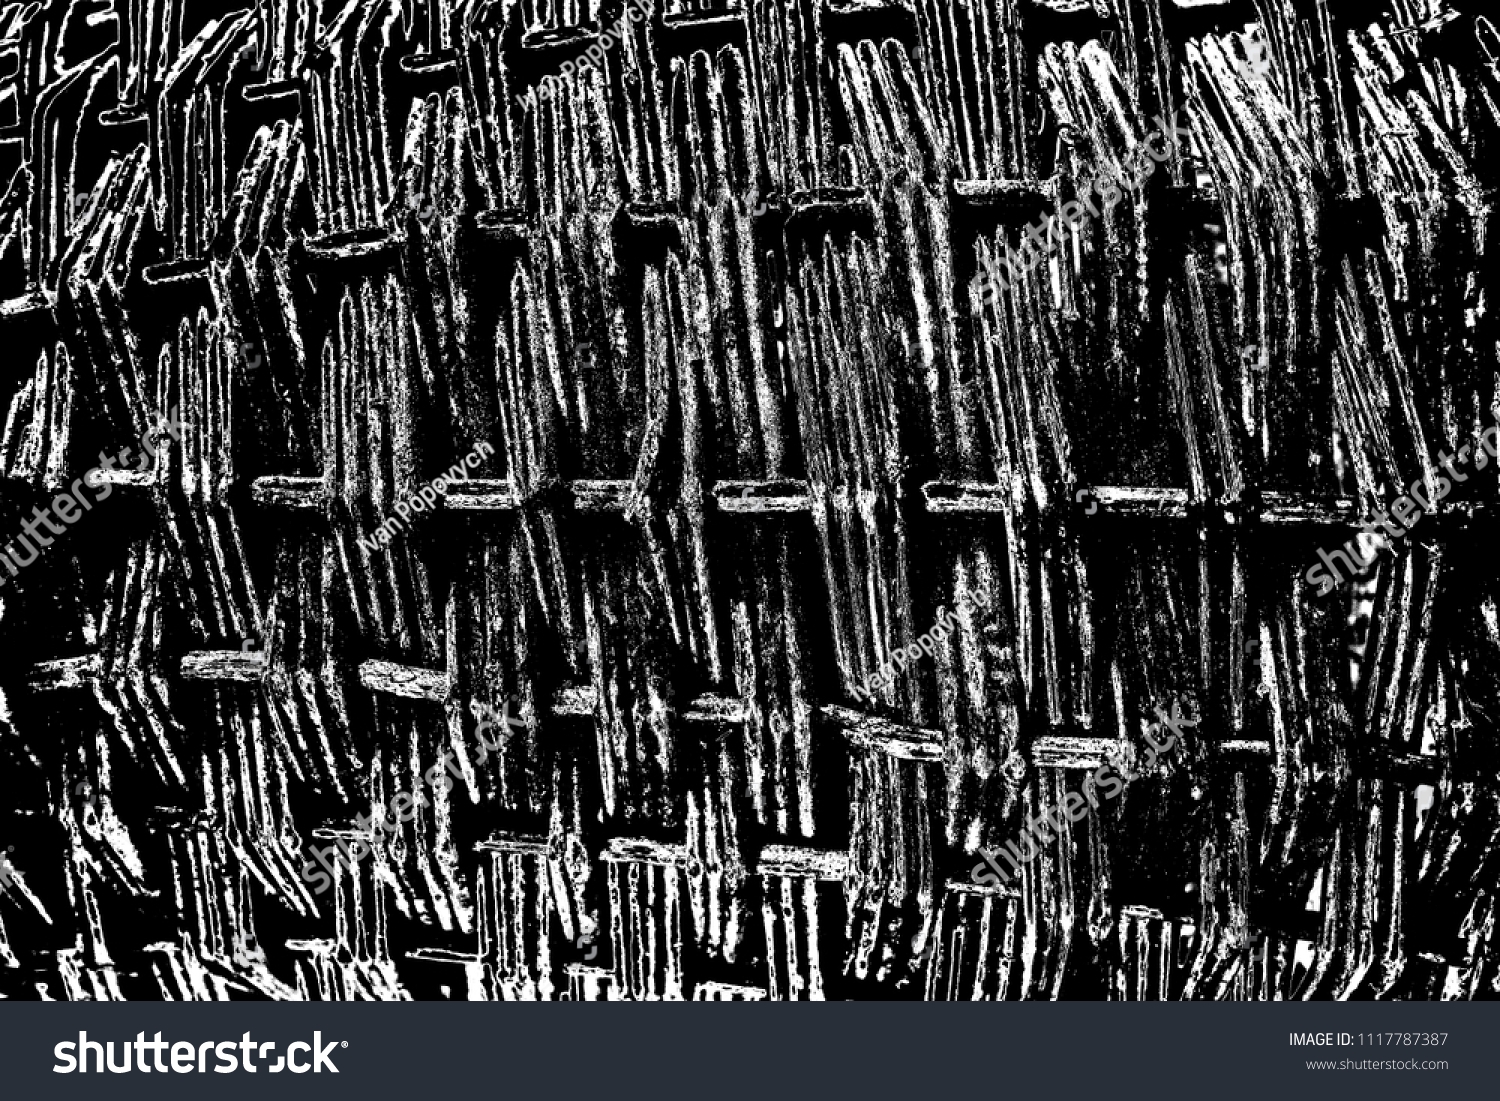 Abstract background. Monochrome texture. Image includes a effect the black and white tones. #1117787387